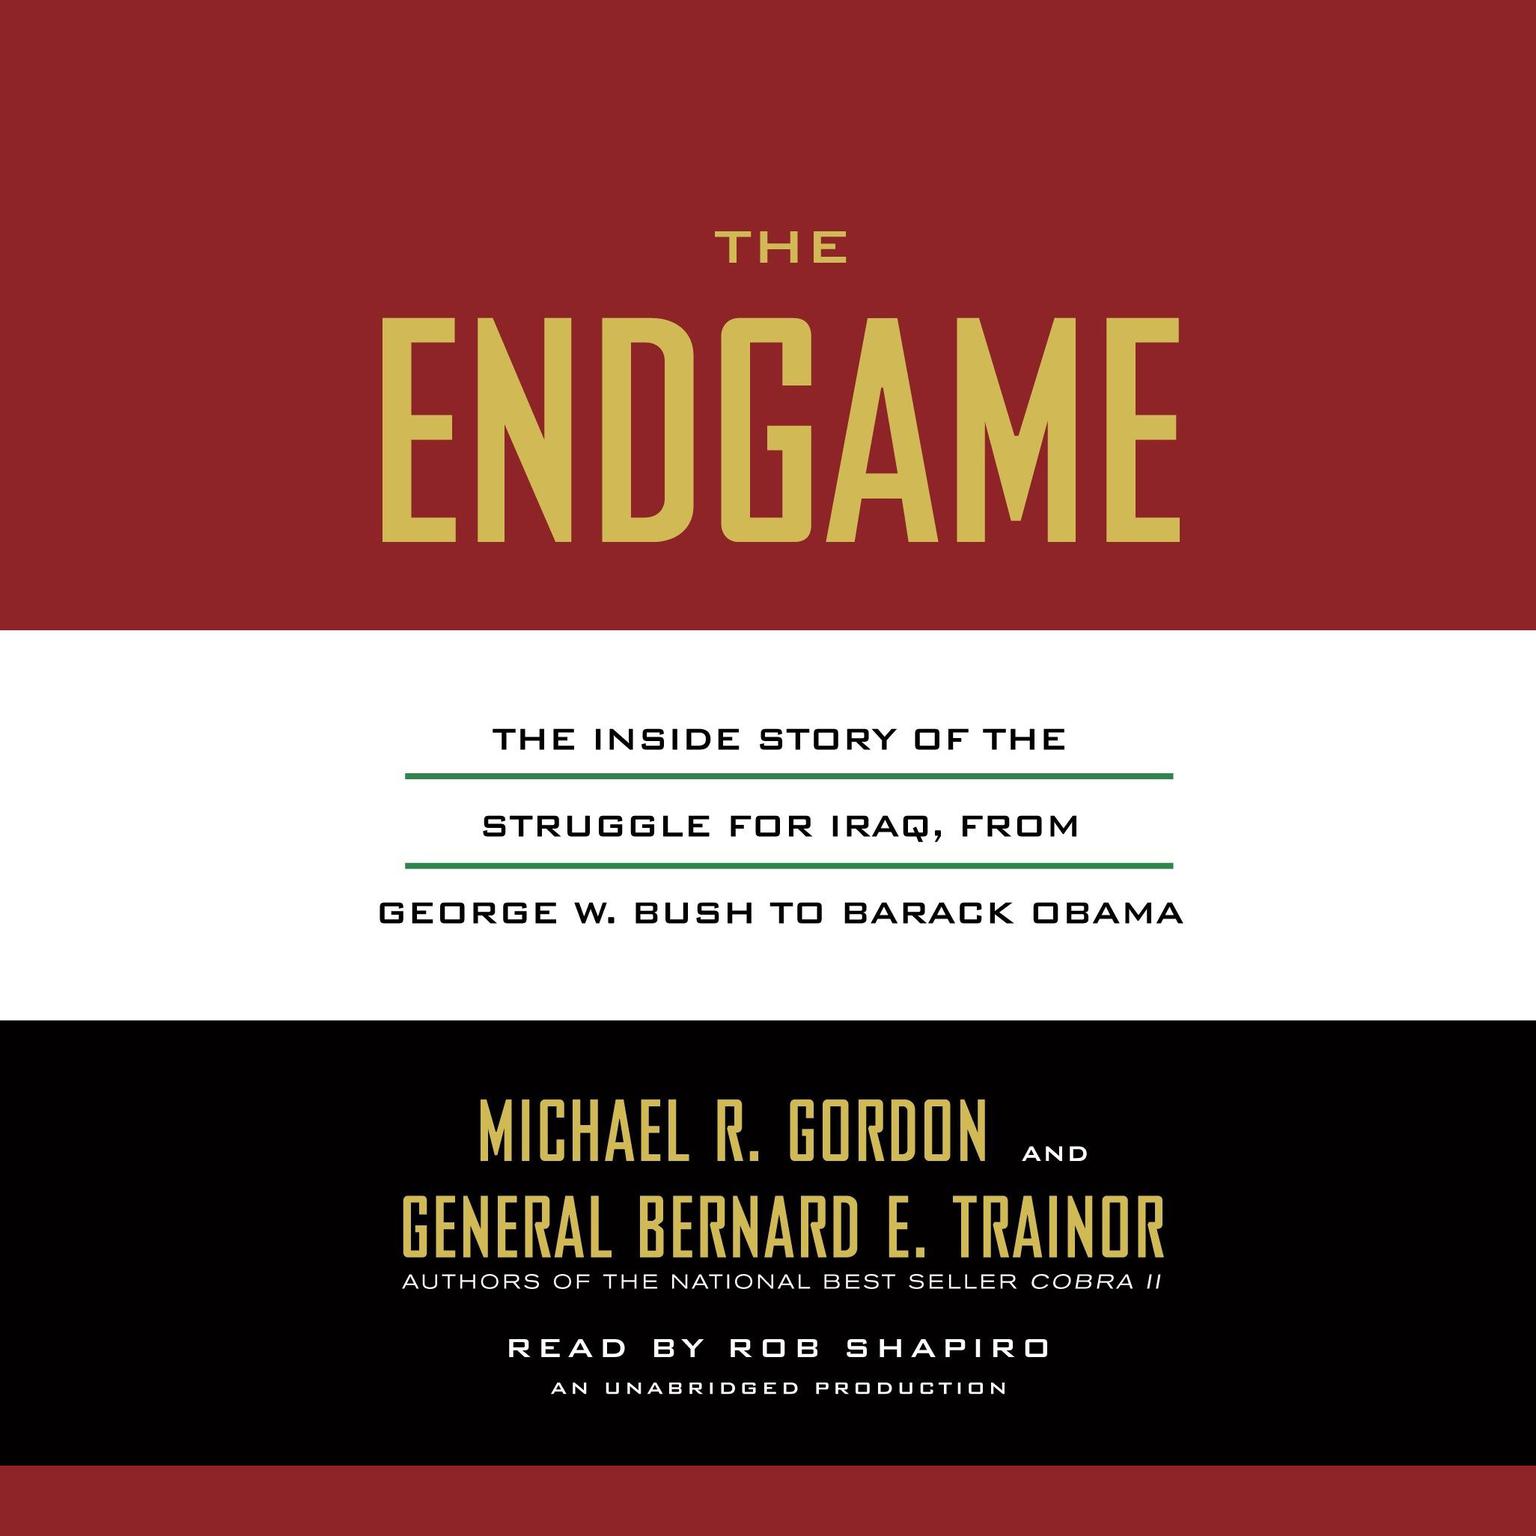 The Endgame: The Inside Story of the Struggle for Iraq, from George W. Bush to Barack Obama Audiobook, by Michael R. Gordon